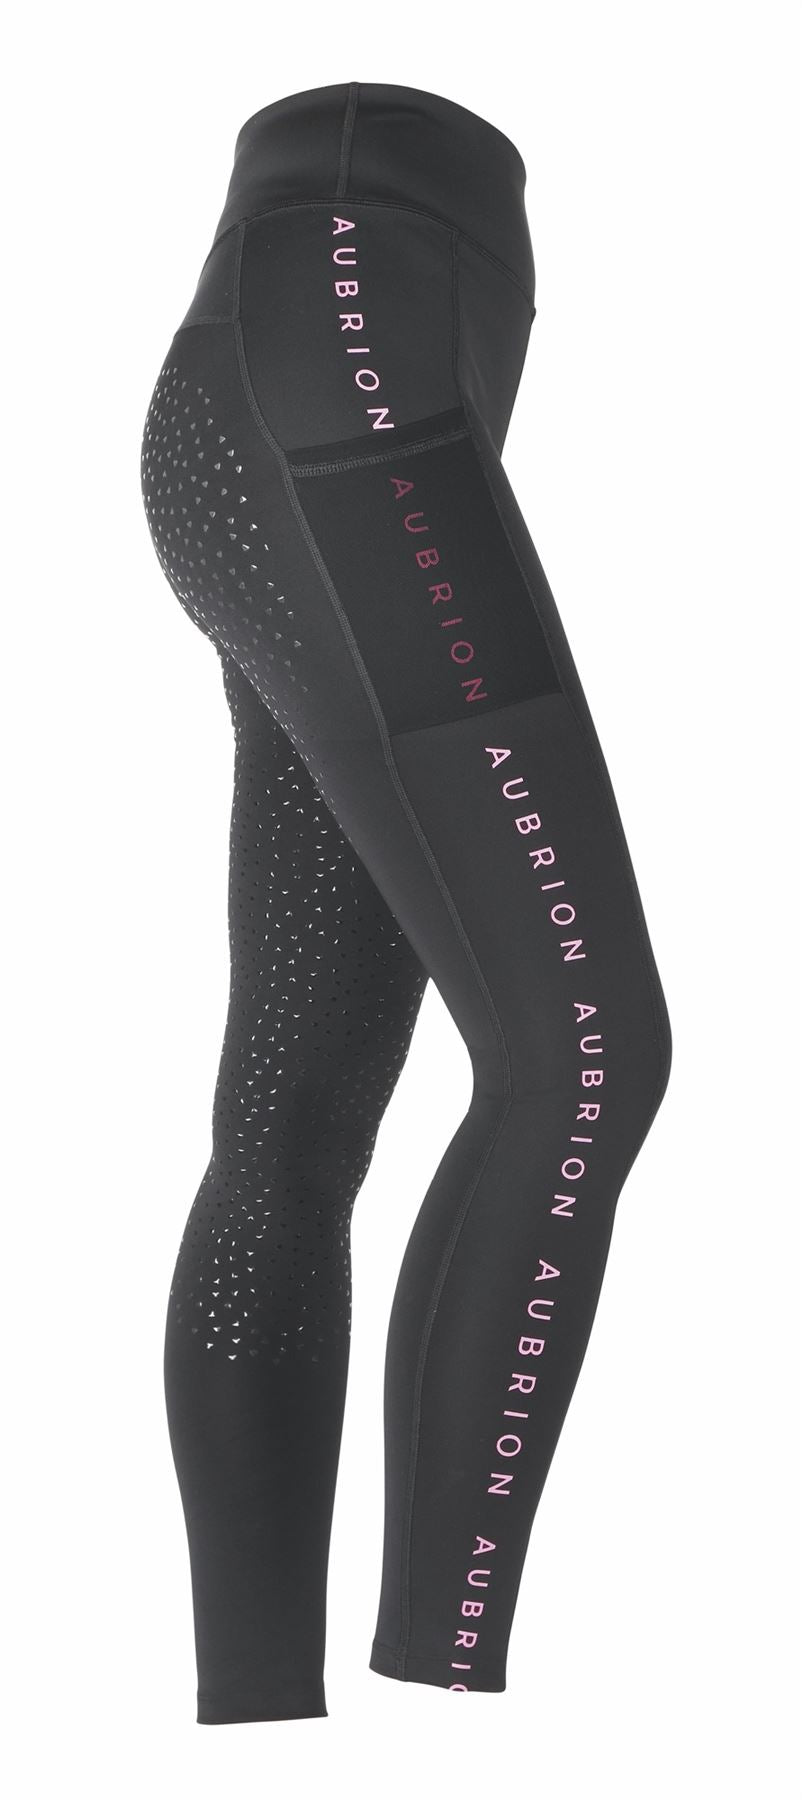 Shires Aubrion Brook Logo Riding Tights - Maids - Just Horse Riders